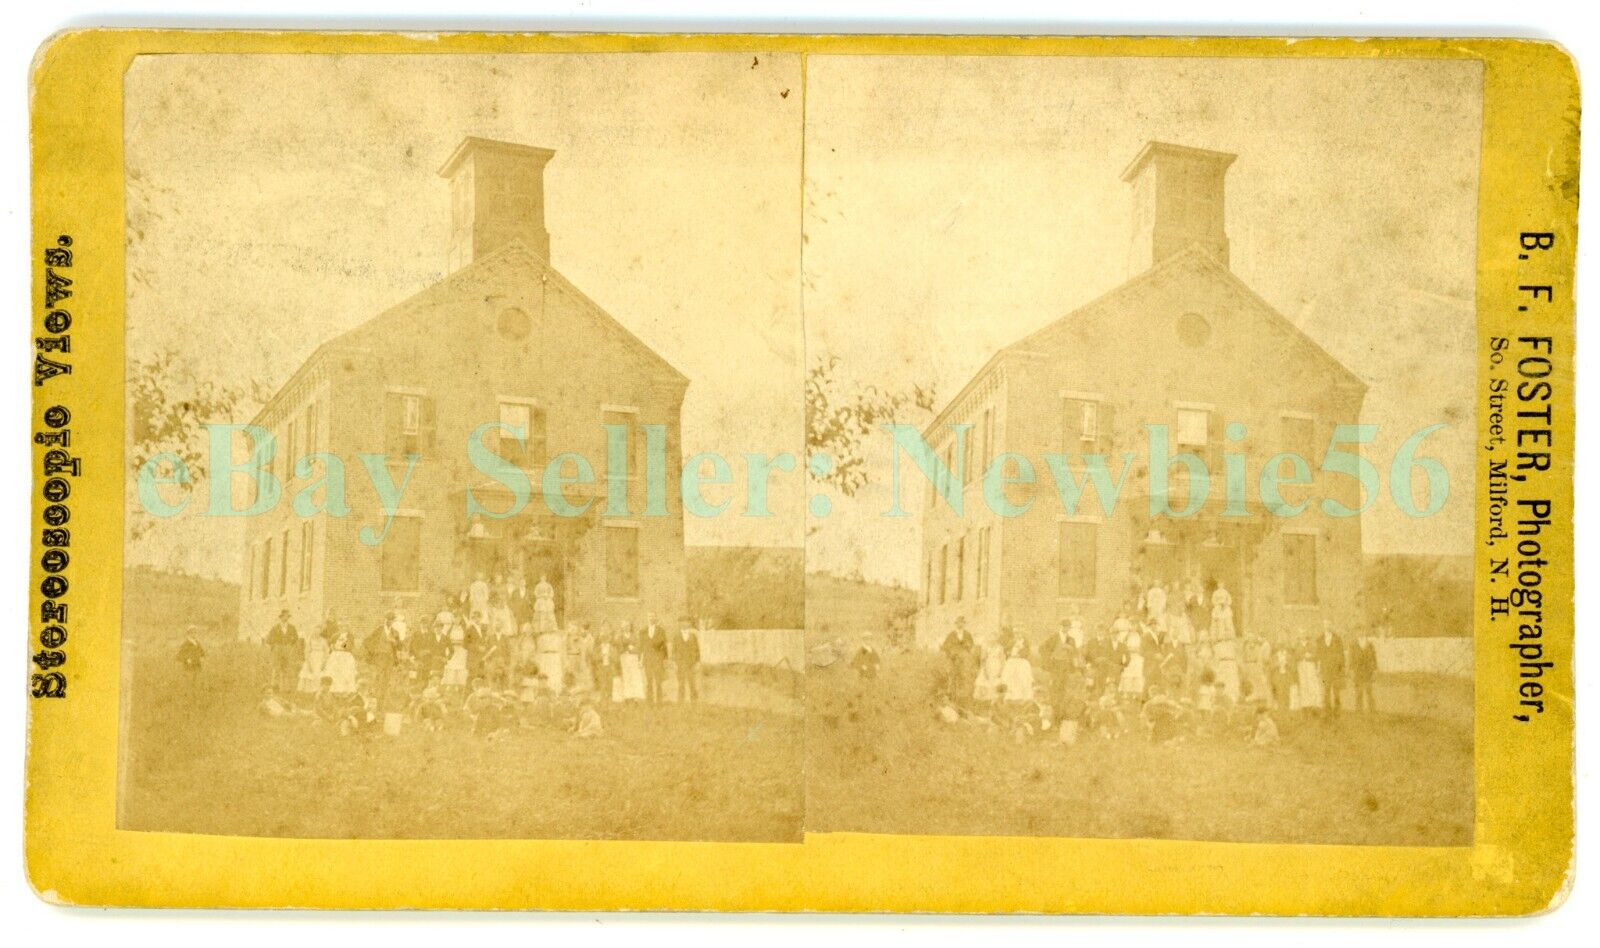 Shirley Mass MA - EARLY SCHOOL HOUSE - c1870s Large Mount Stereoview